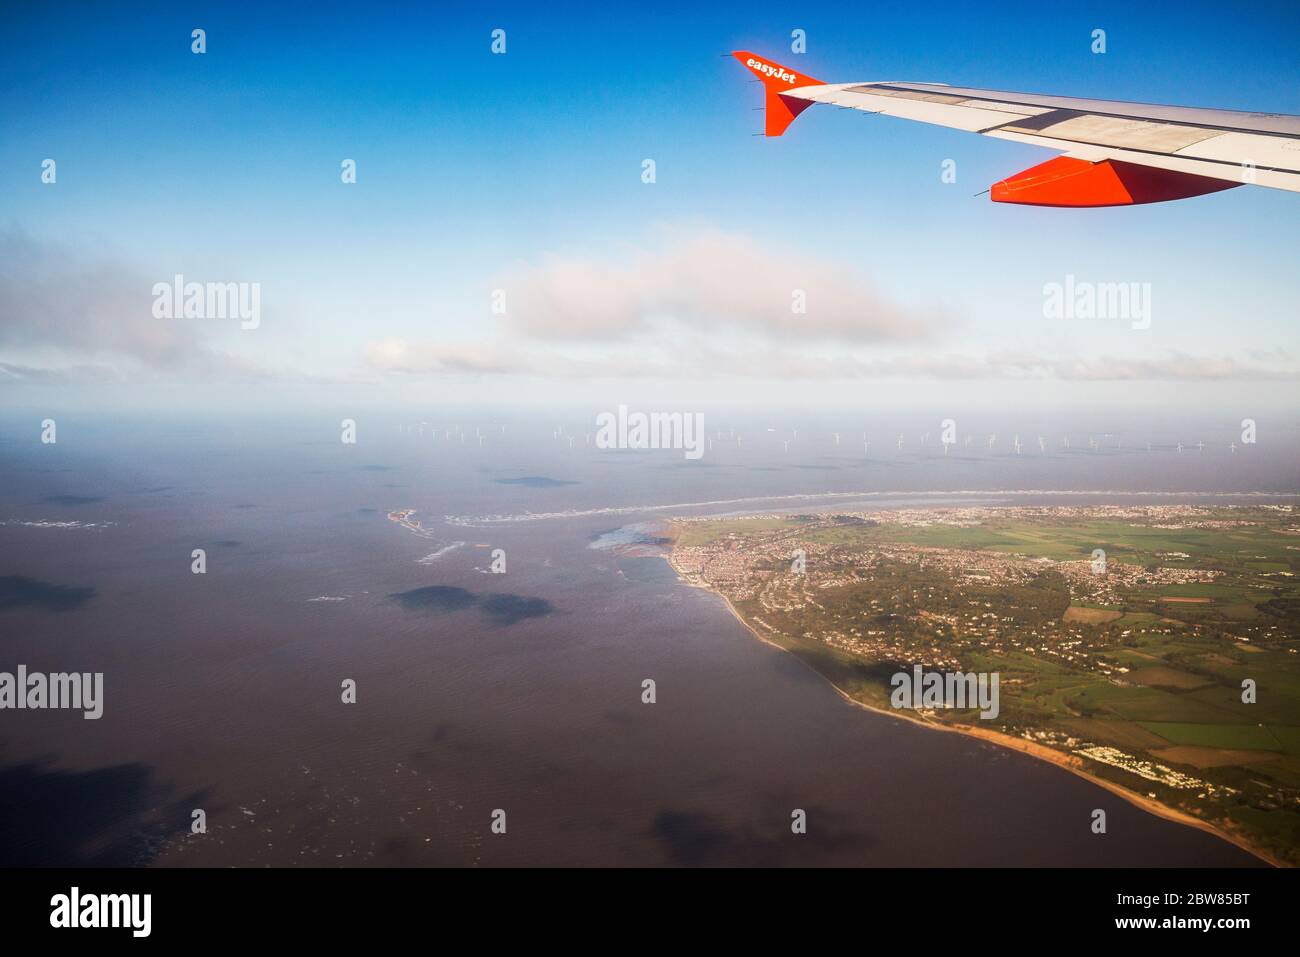 easy jet plane flying in over River Mersey to Liverpool John lennon airport, Merseyside, Liverpool, England,UK Stock Photo